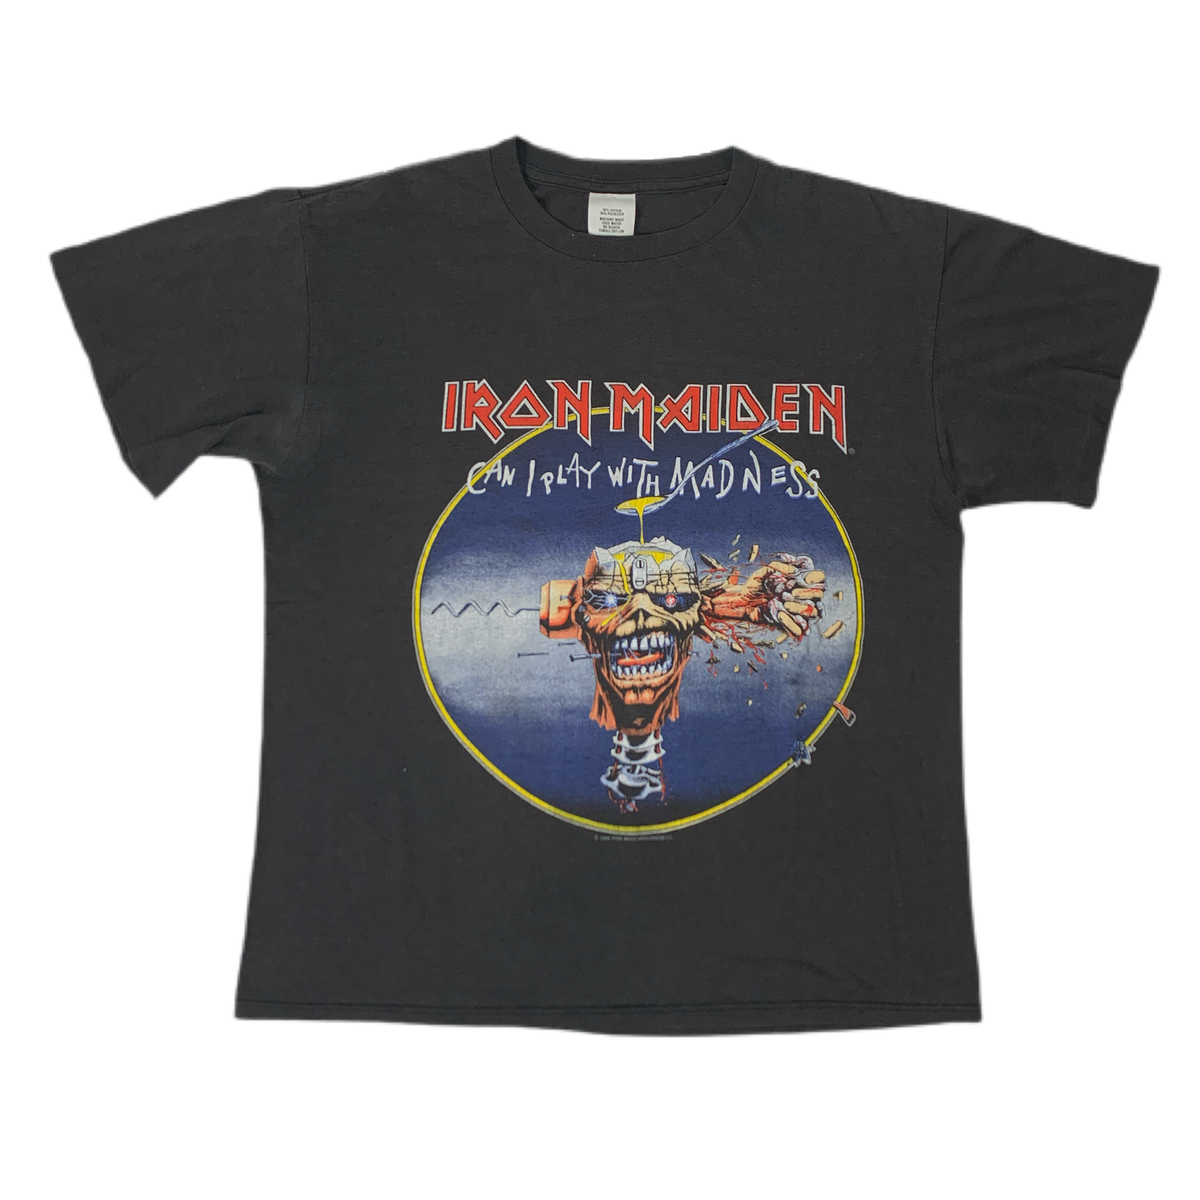 Vintage Iron Maiden “Can I Play With Madness” T-Shirt